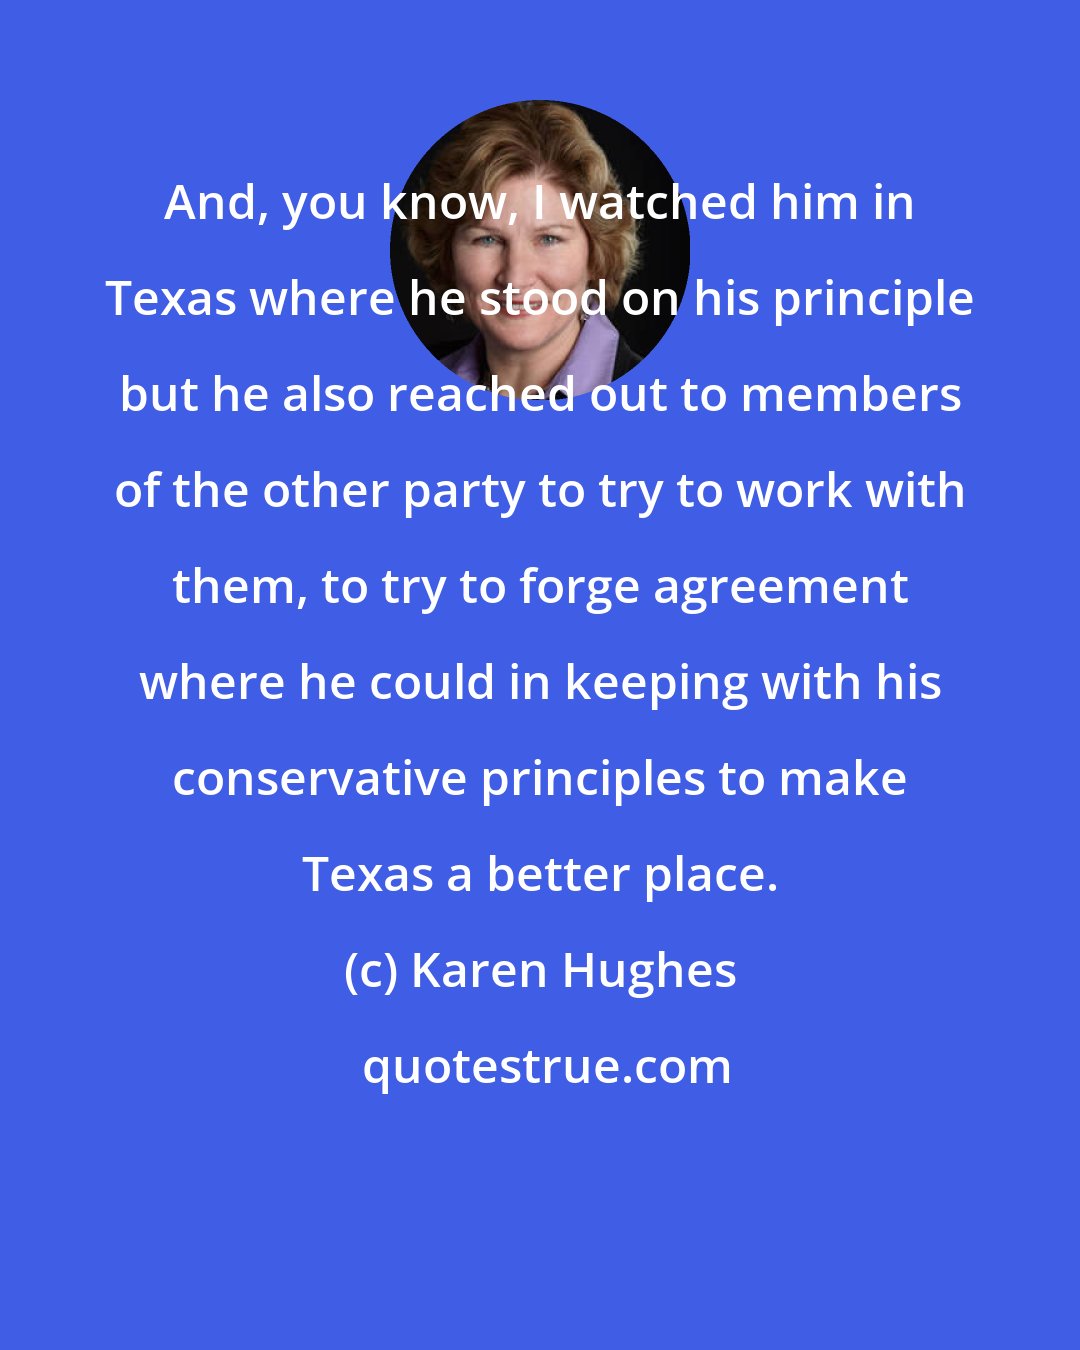 Karen Hughes: And, you know, I watched him in Texas where he stood on his principle but he also reached out to members of the other party to try to work with them, to try to forge agreement where he could in keeping with his conservative principles to make Texas a better place.